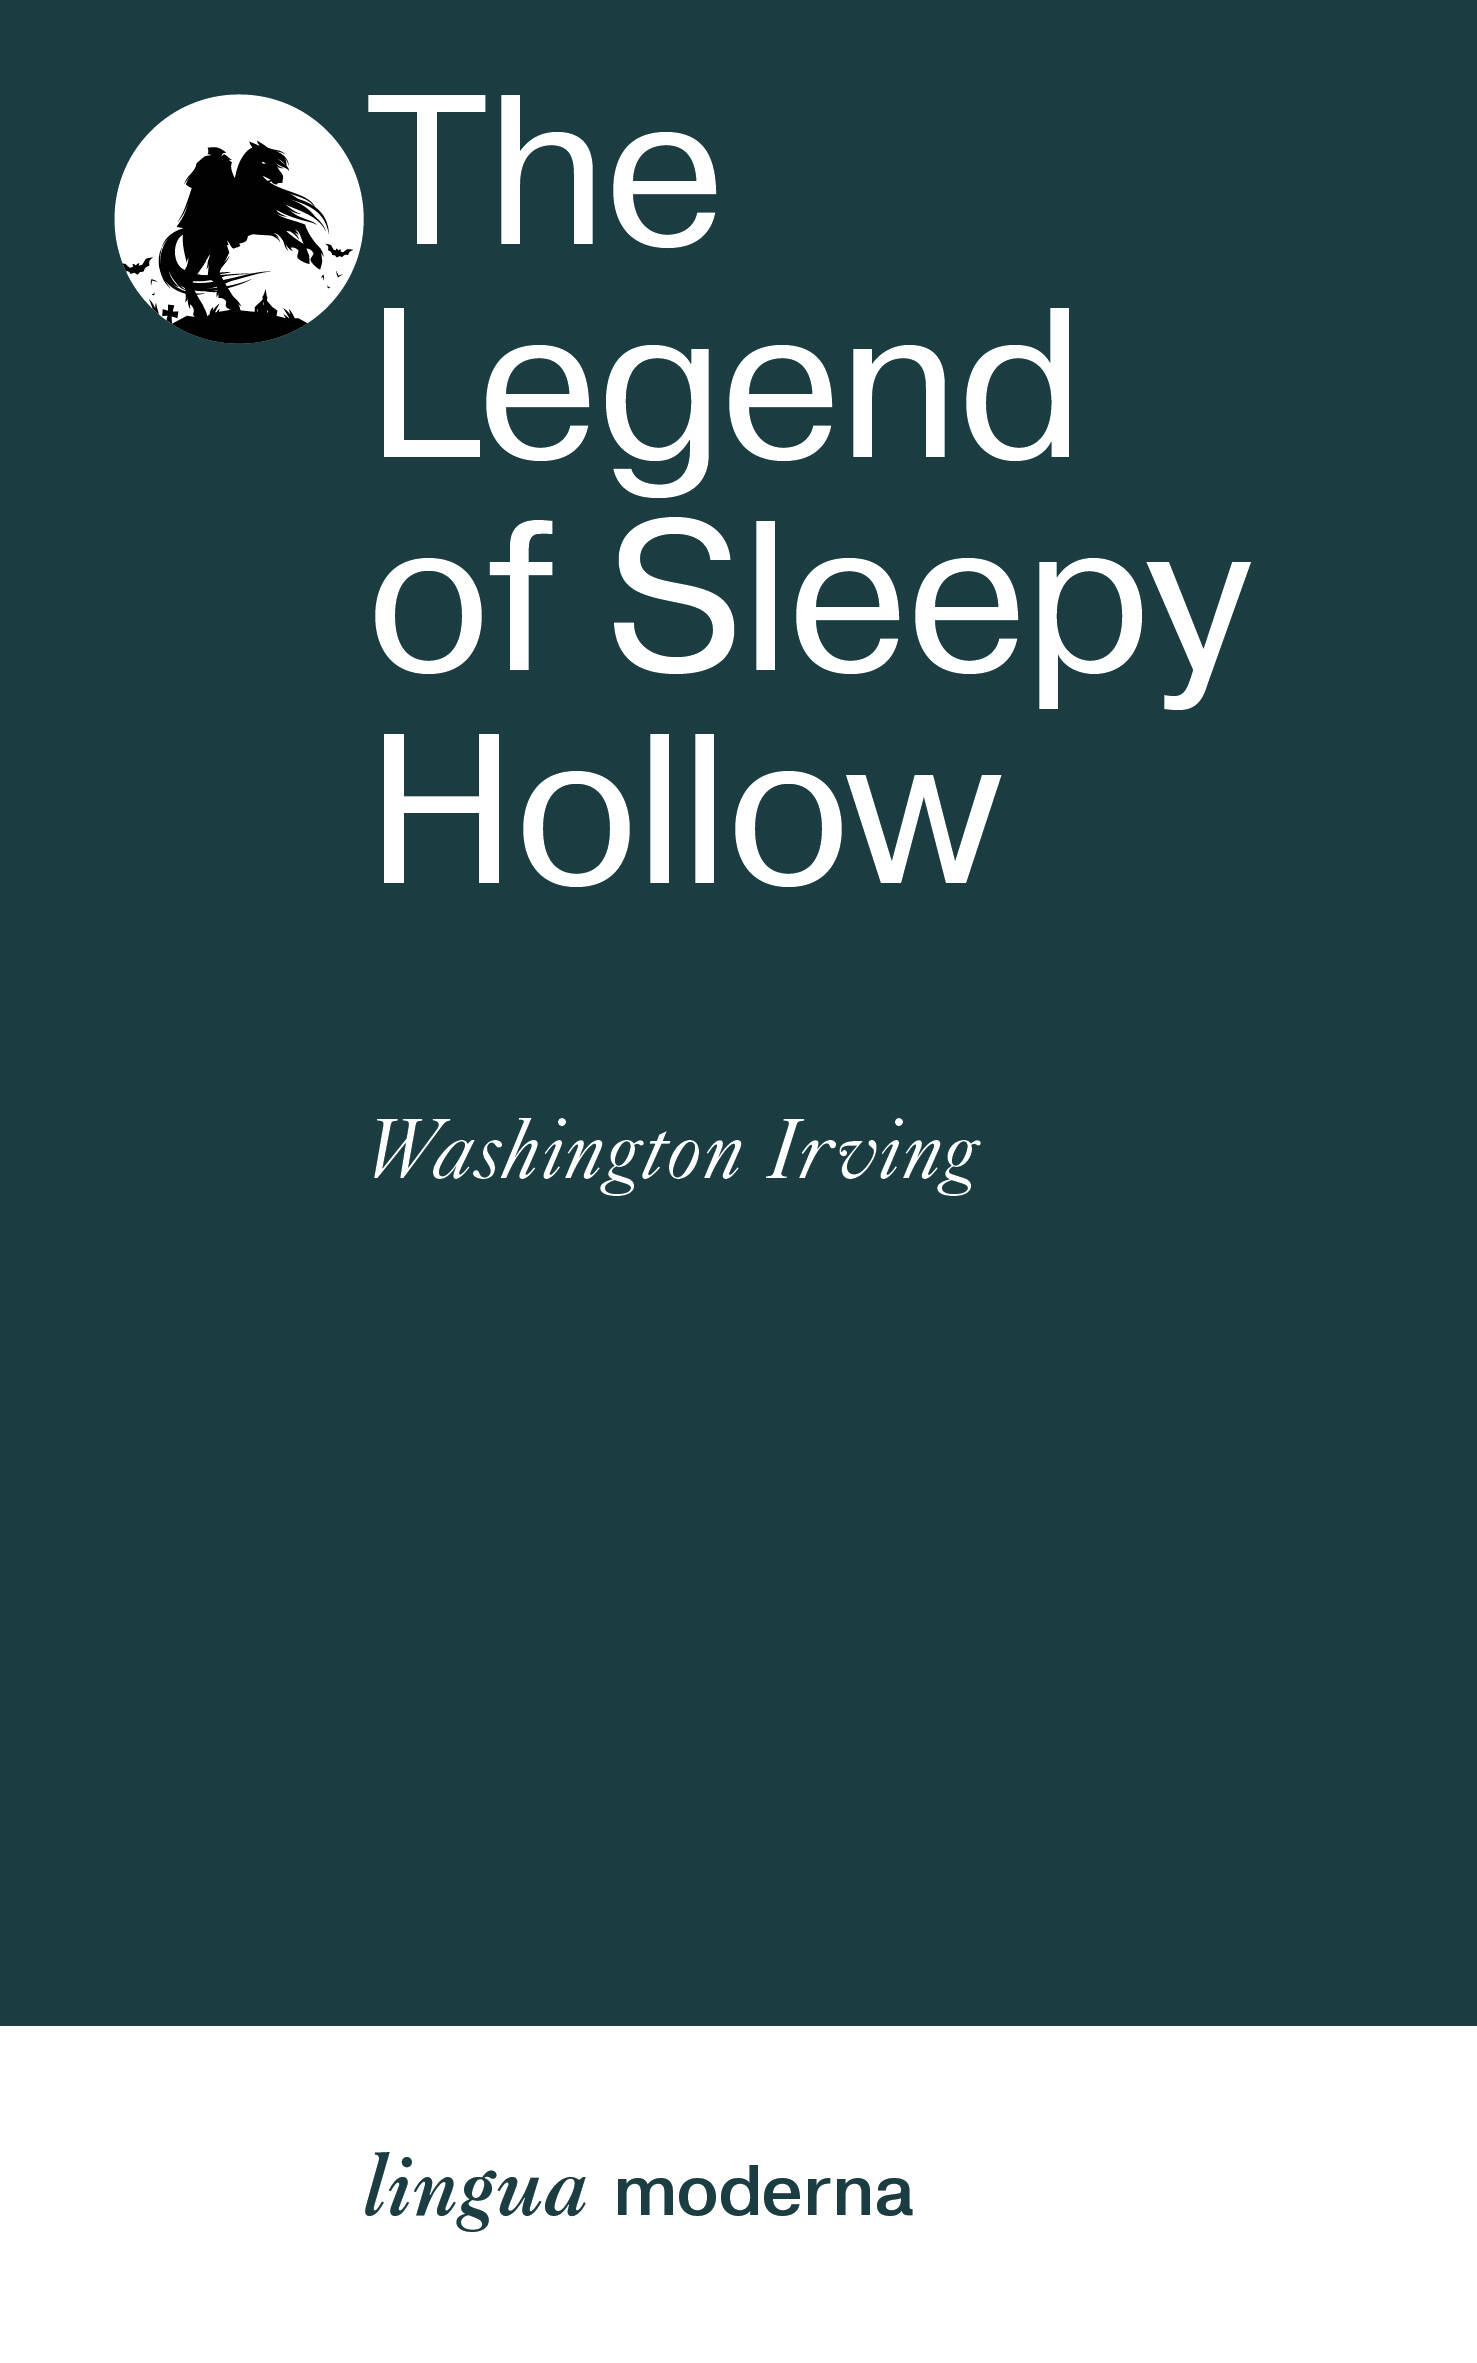 irving w the legend of sleepy hollow and other stories Irving Washington The Legend of Sleepy Hollow